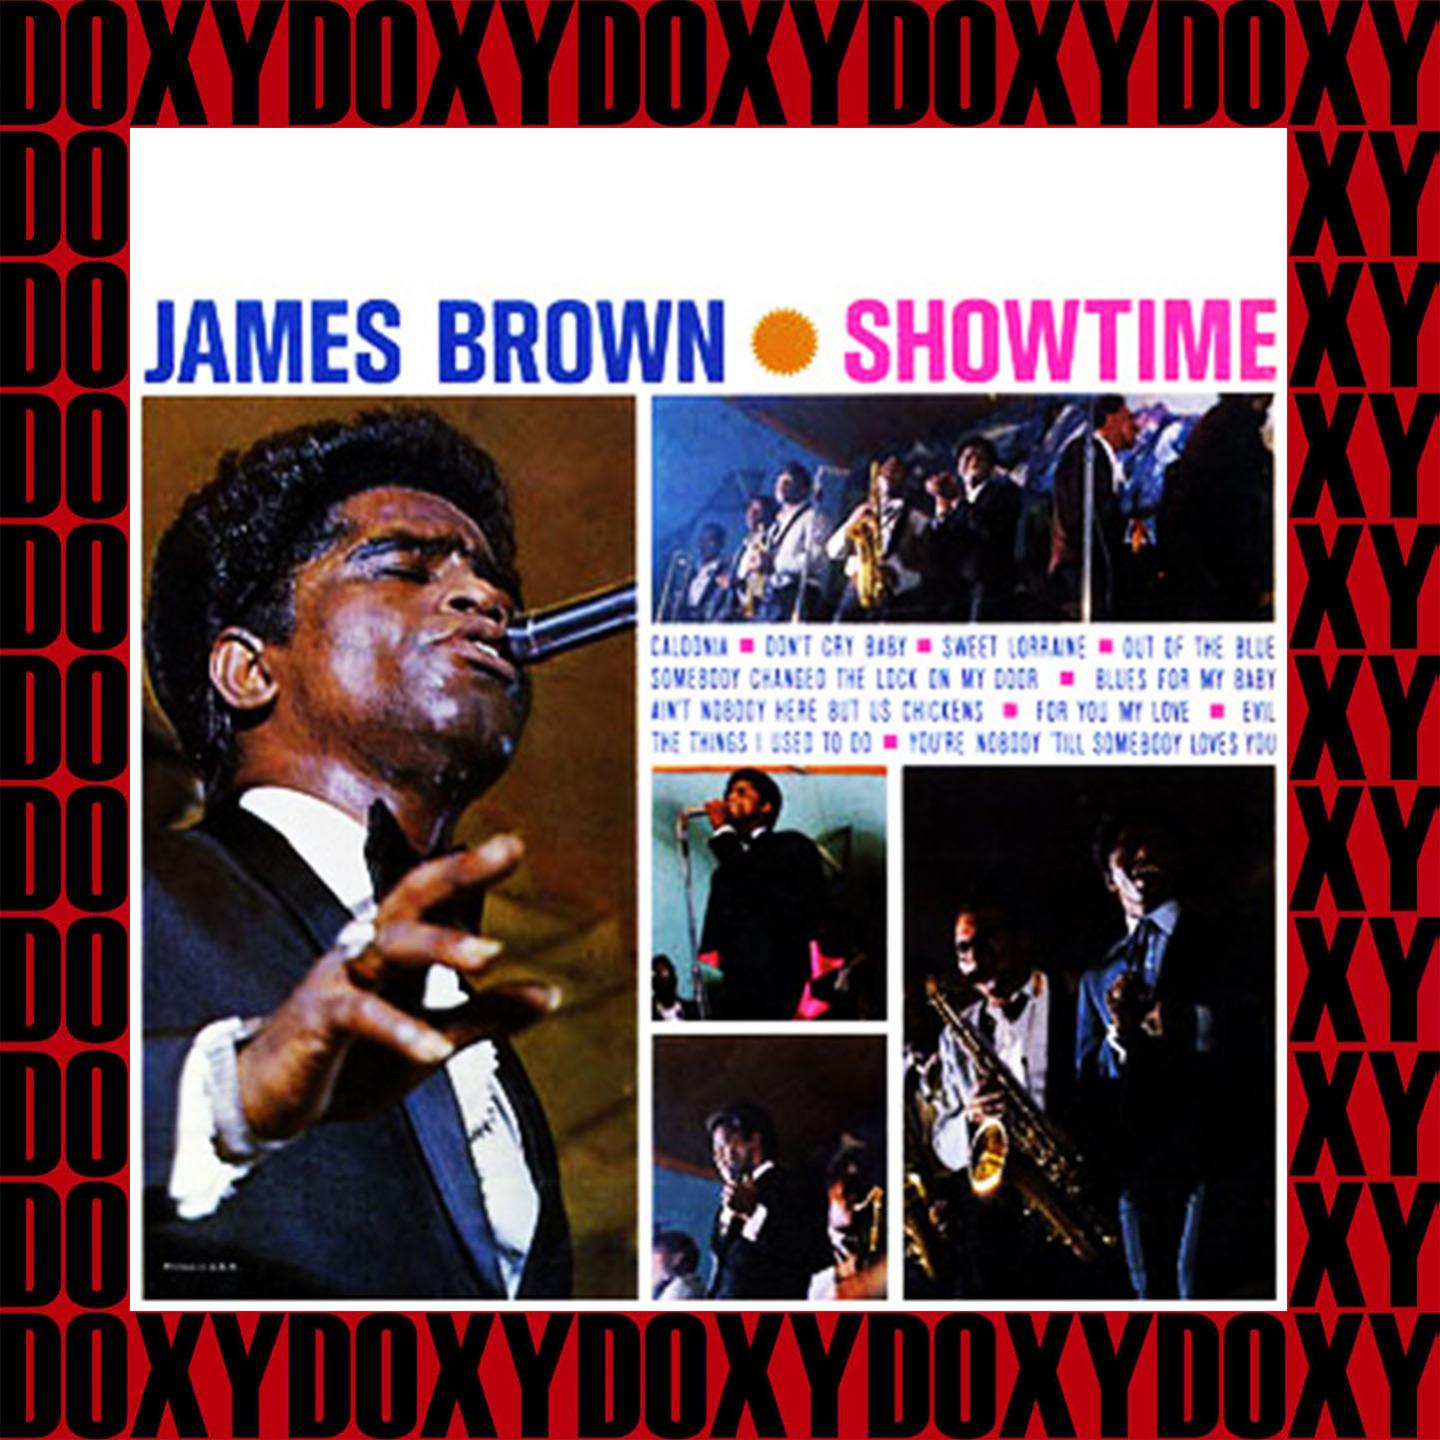 Showtime (Expanded, Remastered Version) (Doxy Collection)